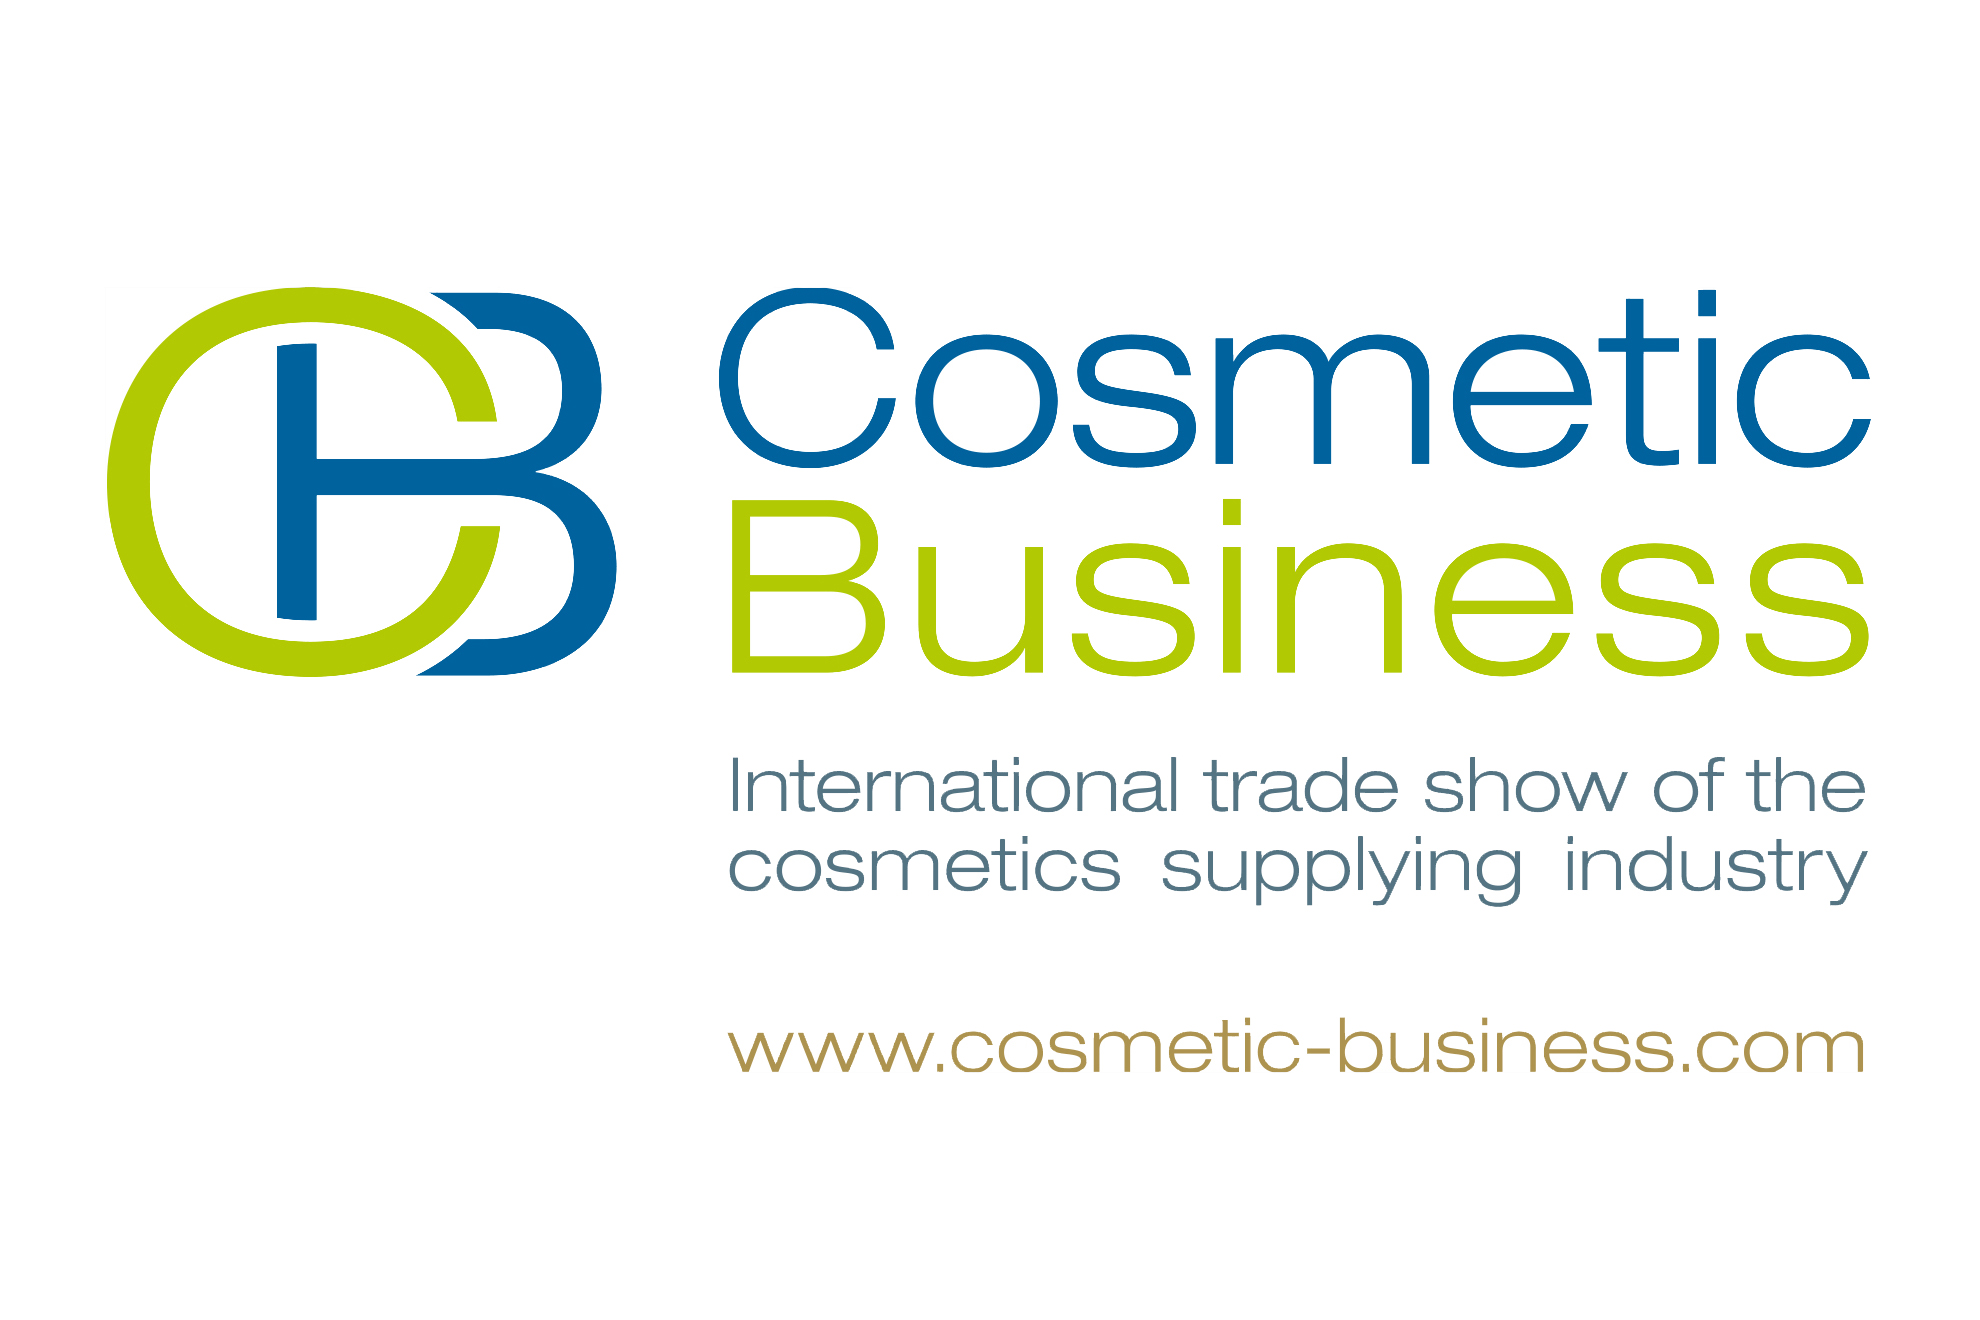 Cosmetic Business München 2021